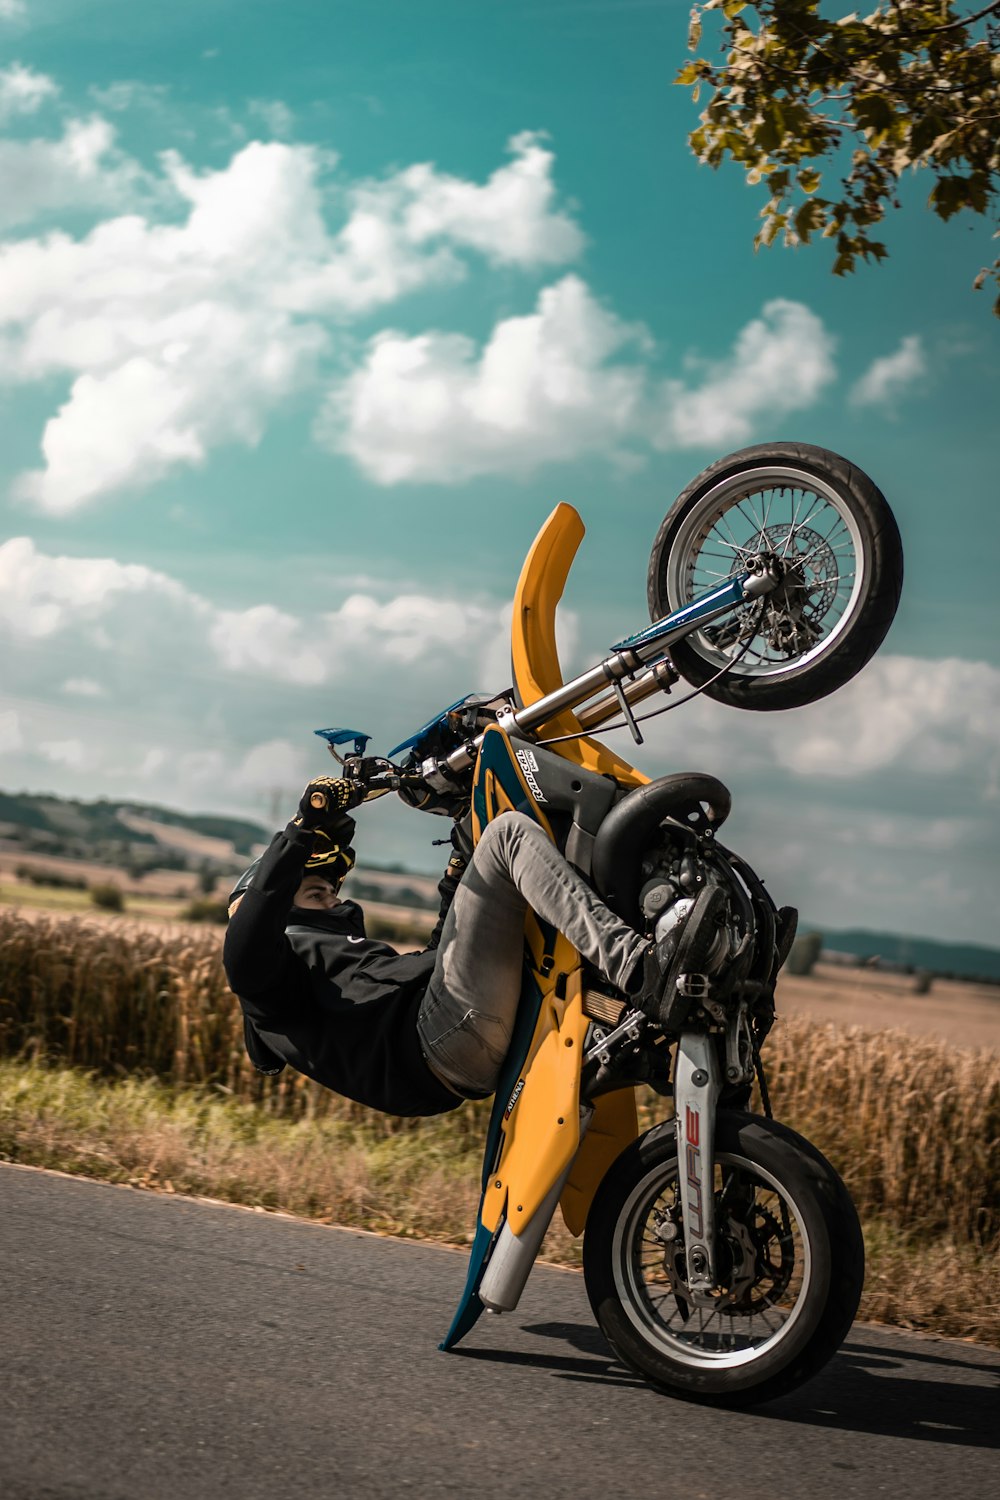 man riding yellow motocross dirt bike on road near grass during cloudy day